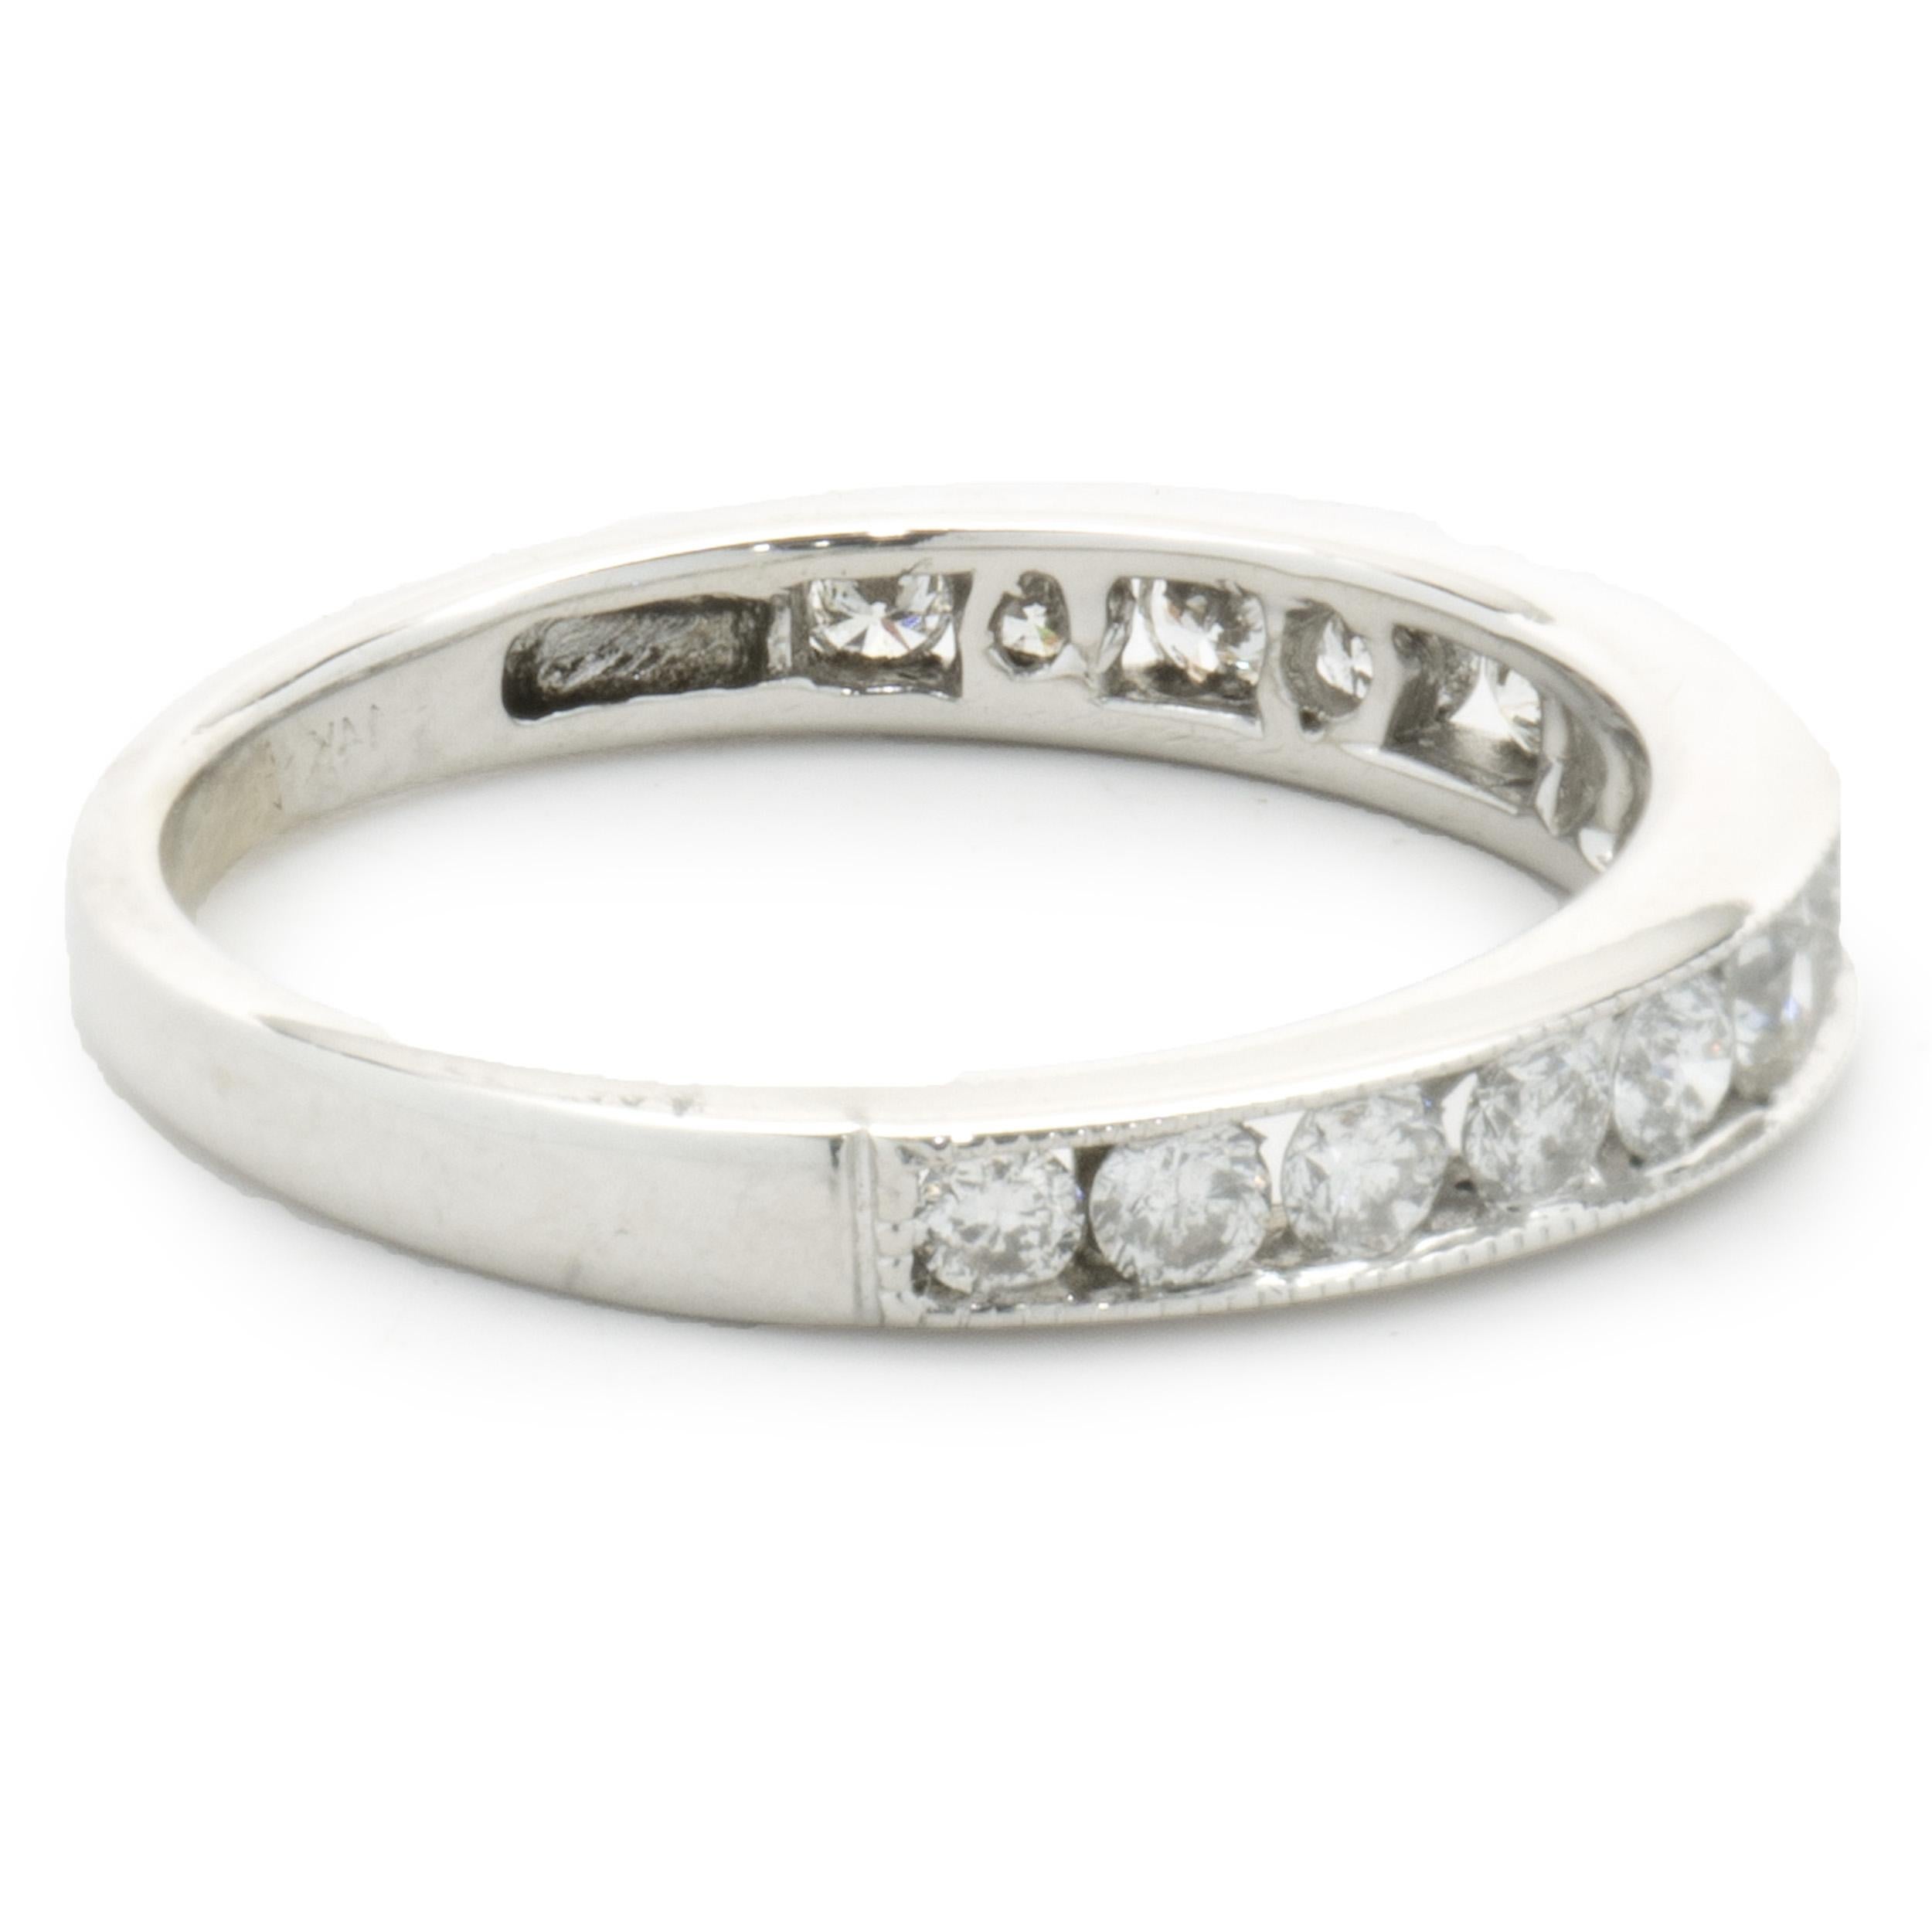 14 Karat White Gold Channel Set Diamond Band In Excellent Condition For Sale In Scottsdale, AZ